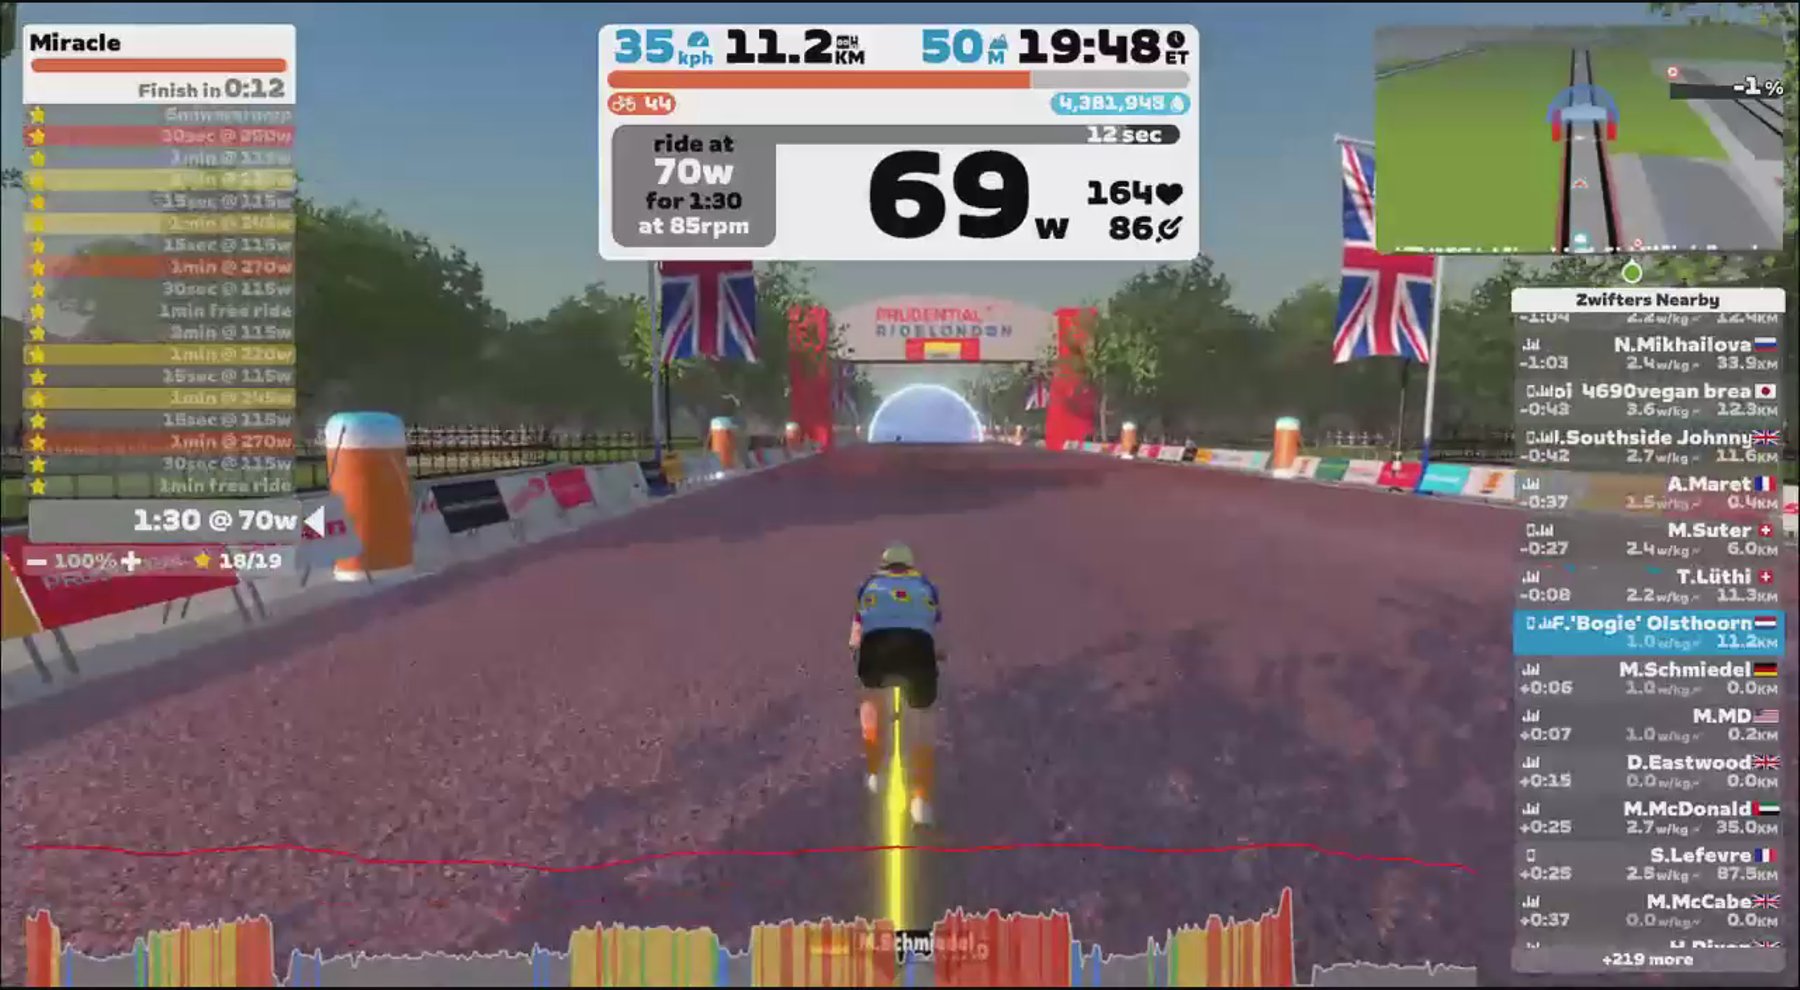 Zwift - Miracle in London